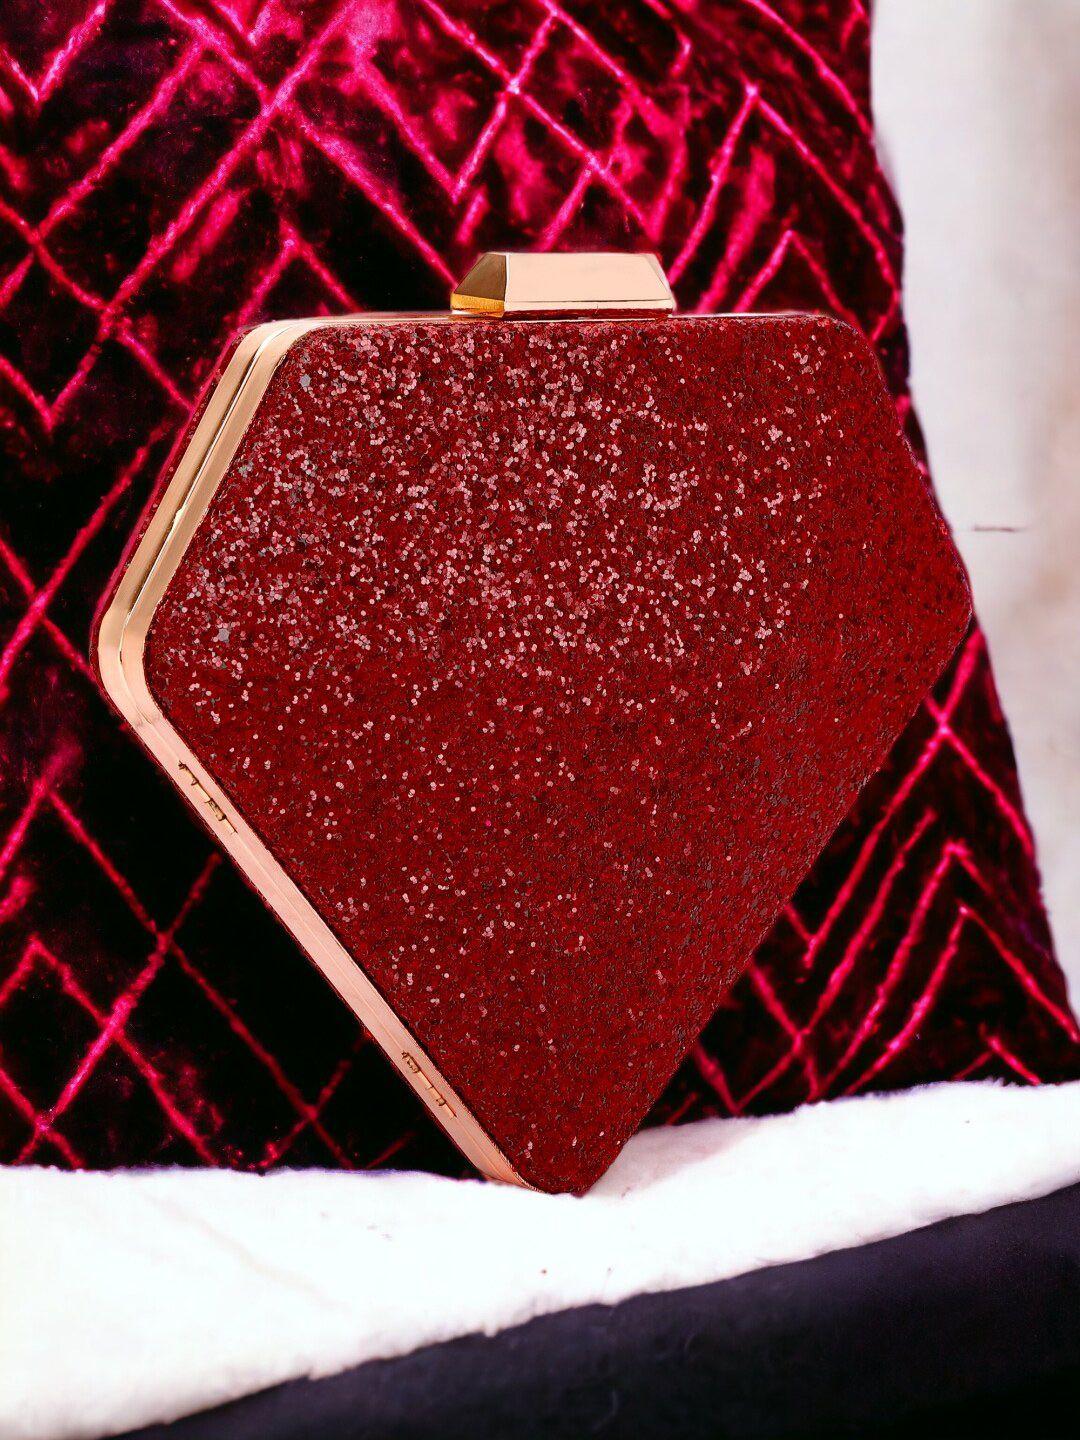 toobacraft red & gold-toned embellished diamond clutch